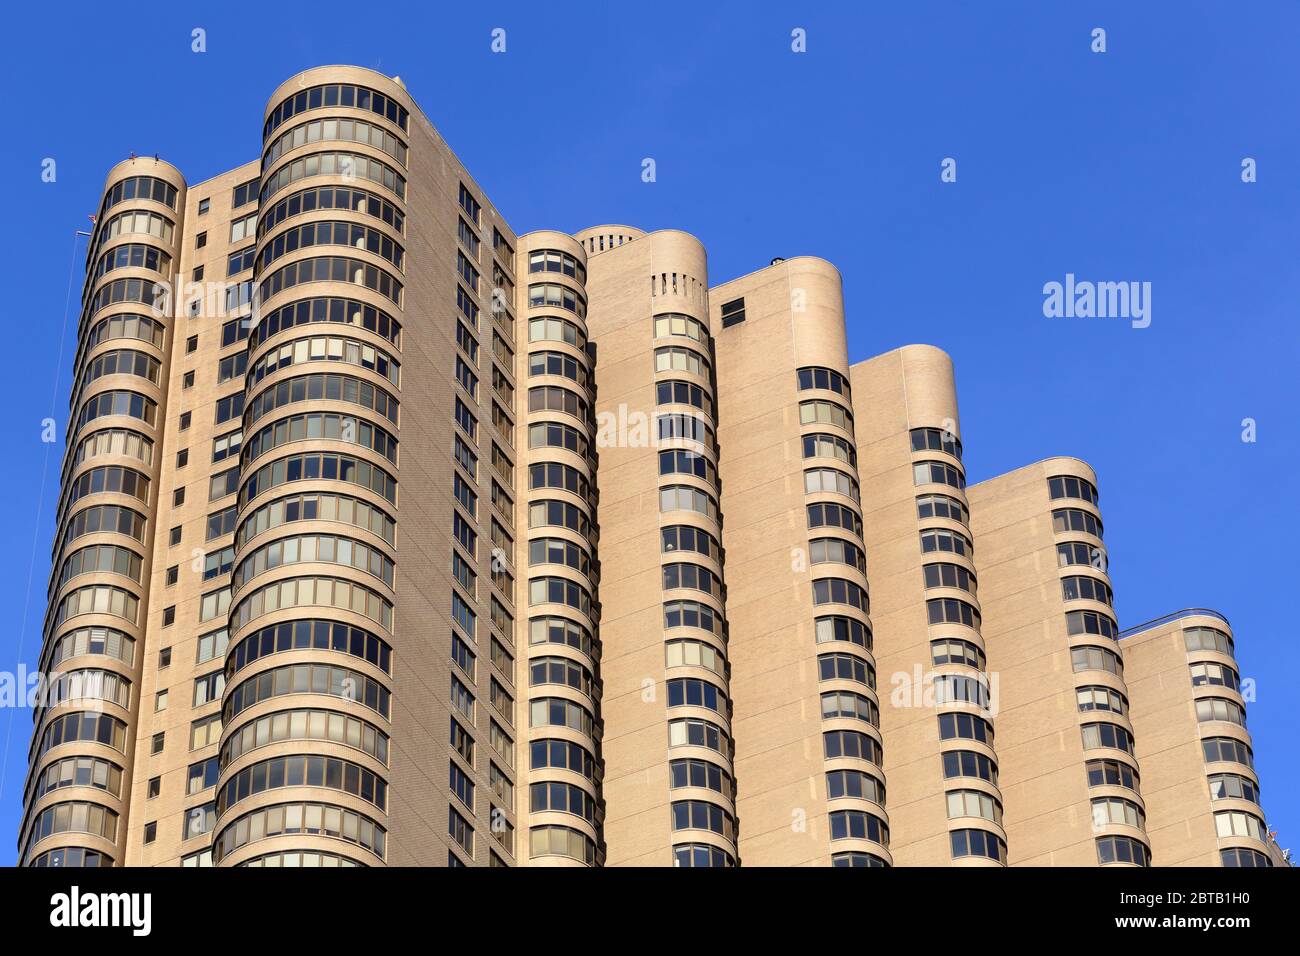 The Corinthian 330 East 38th Street New York Ny The Top Of An Iconic Condominium In The East Side Of Manhattan Stock Photo Alamy